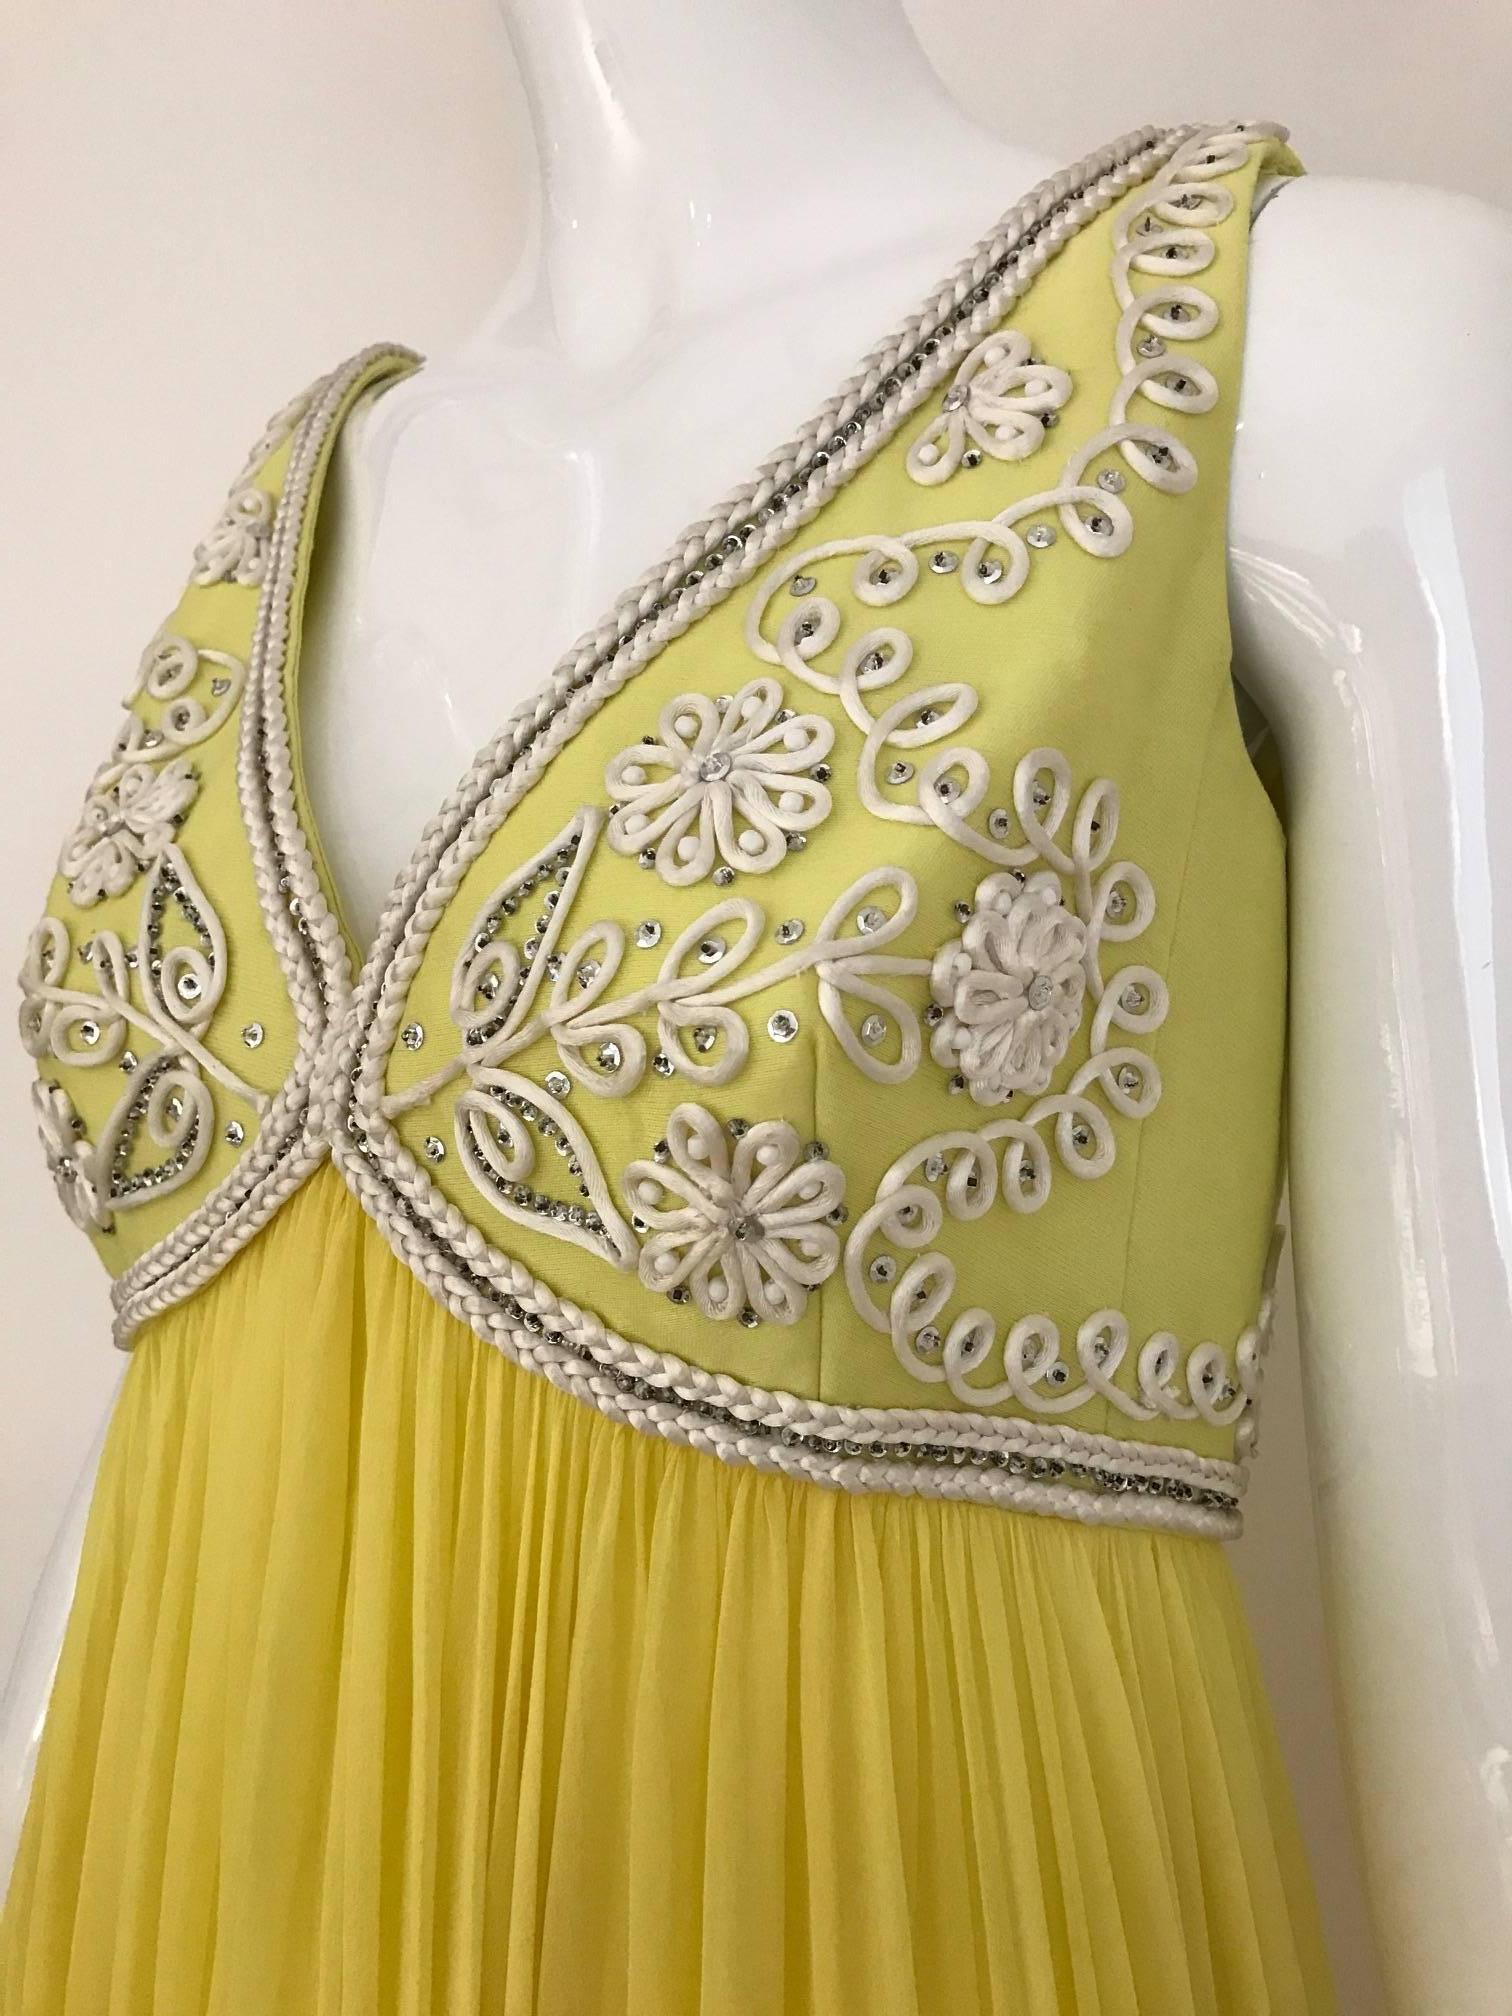 Vintage 1960s Sylvia Nechis Yellow Silk Chiffon sleeveless V neck Soutache gown with cropped Jacket ensemble. White cord soutache and silver tiny sequins trough out the bodice and jacket. Perfect Wedding Dress or bridesmaid dress.

Fit Modern US